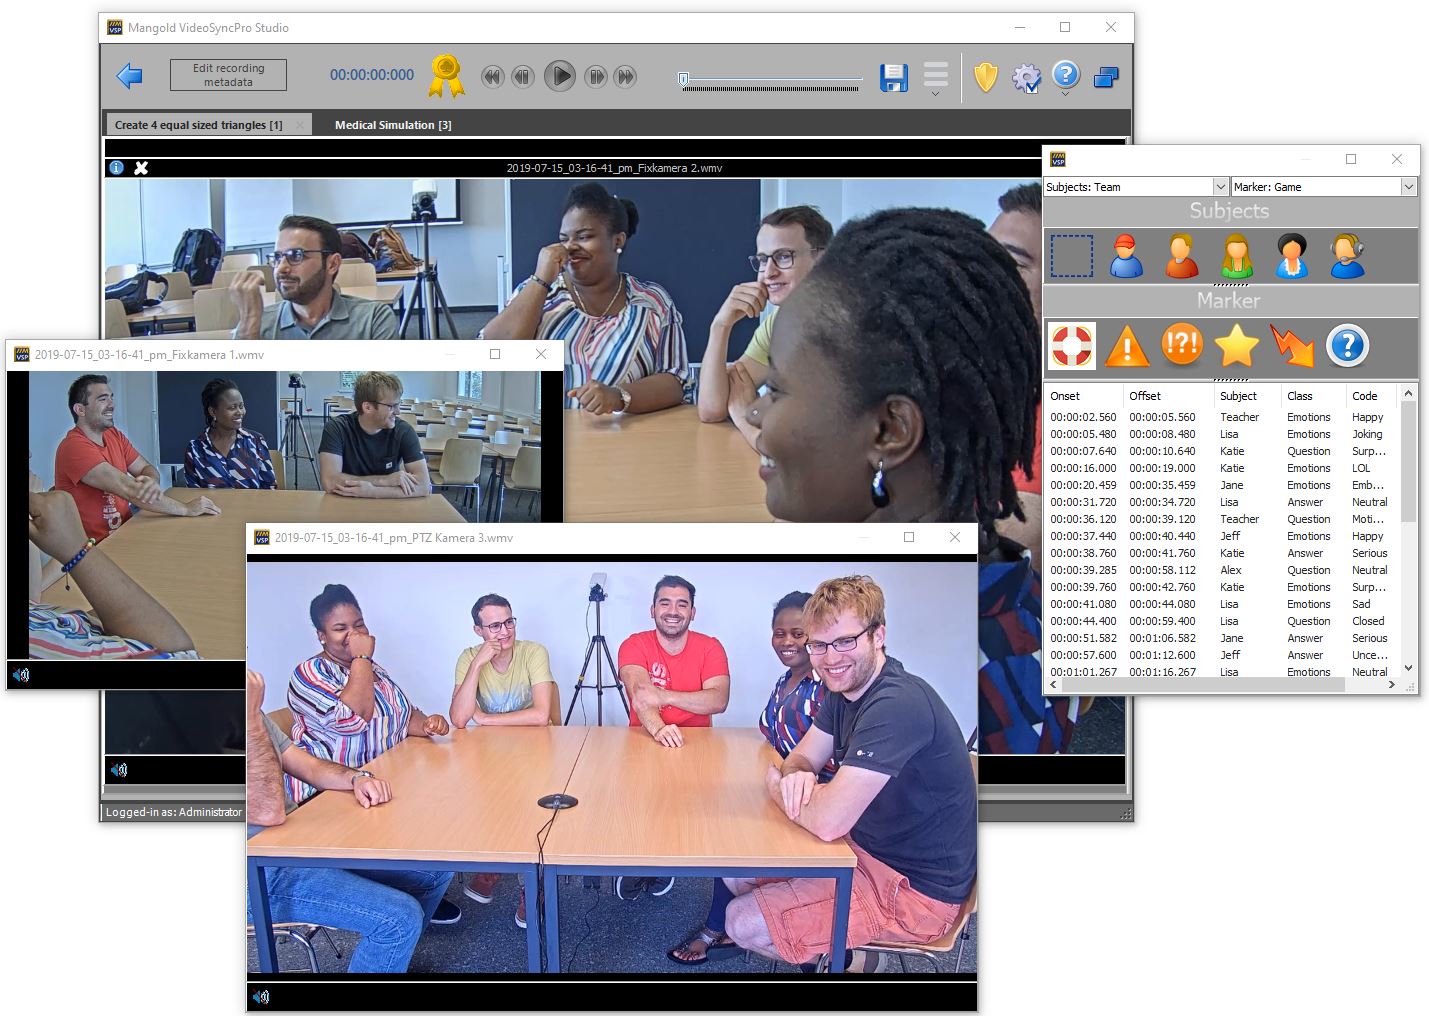 Mangold VideoSyncPro software in classroom observation